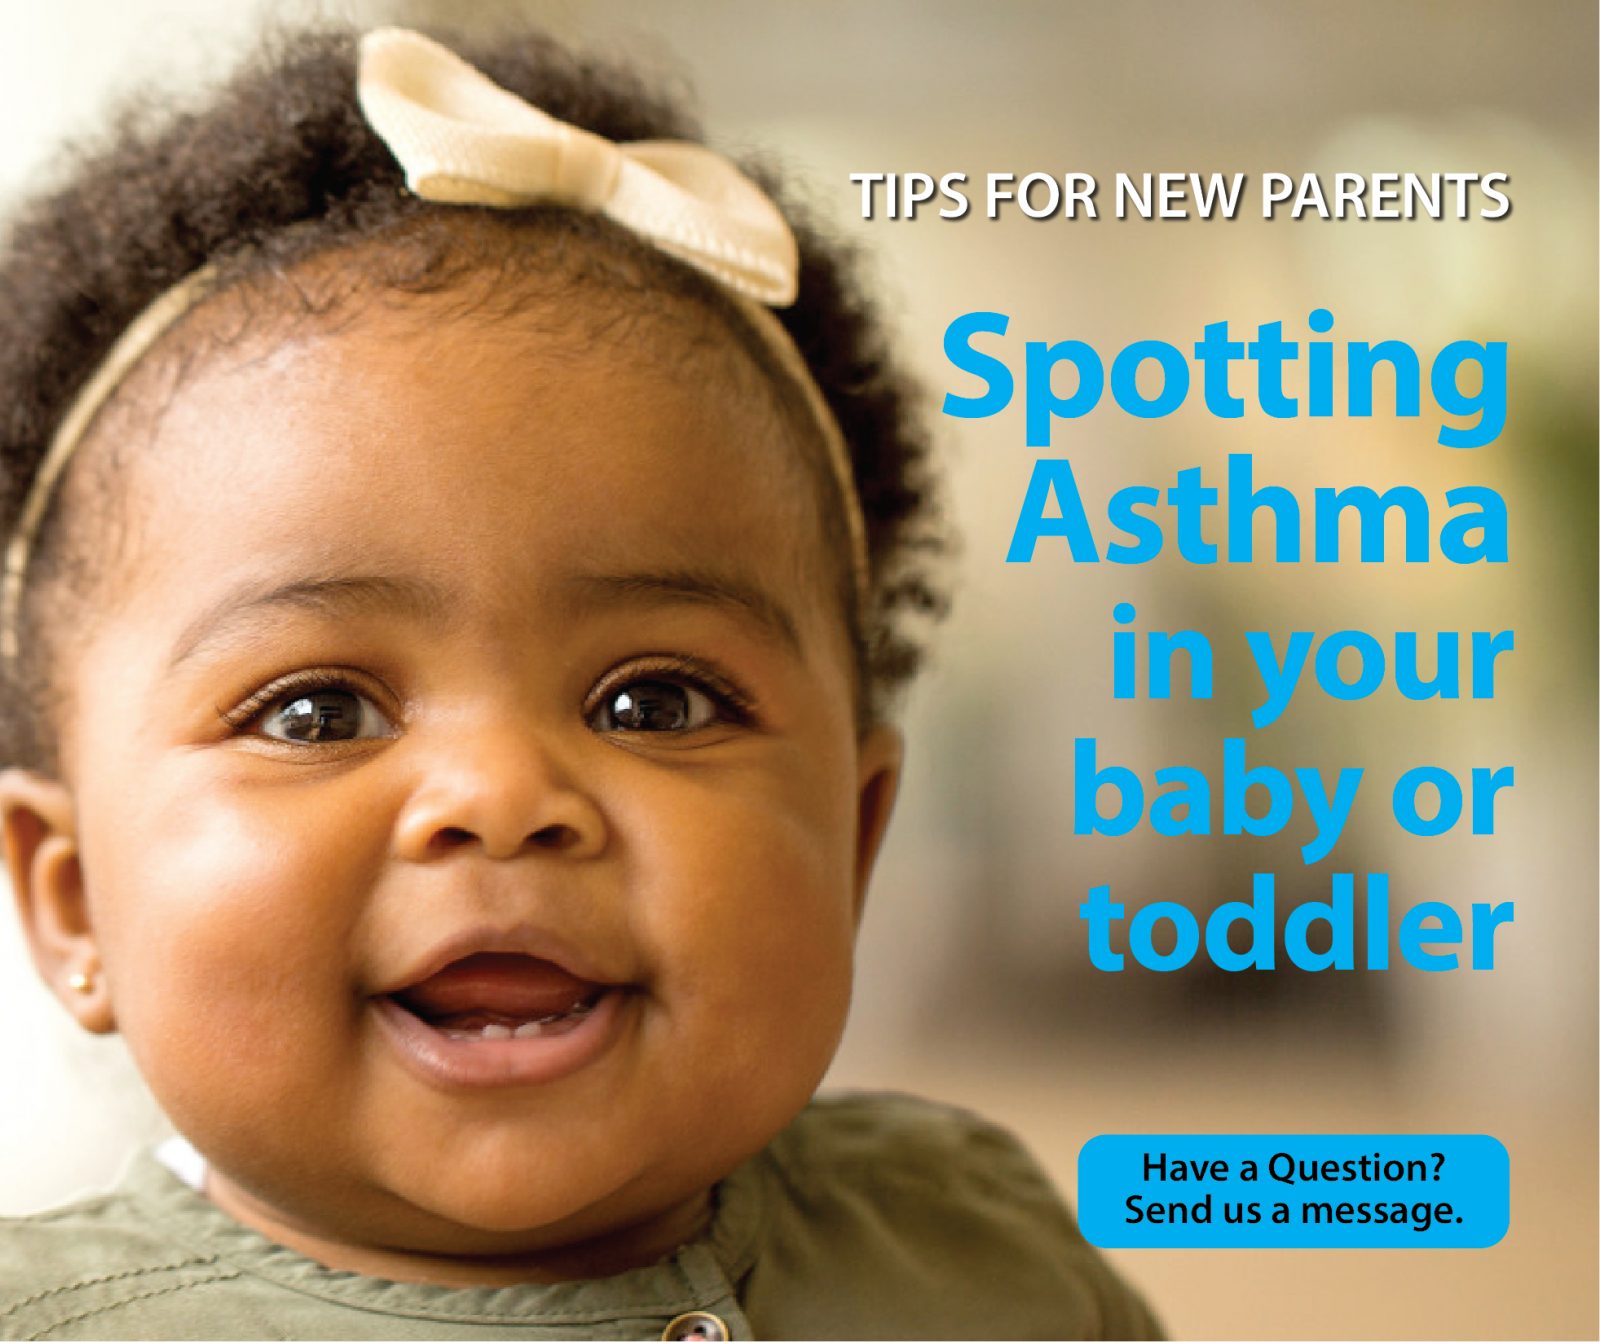 Spotting Asthma in babies & toddlers